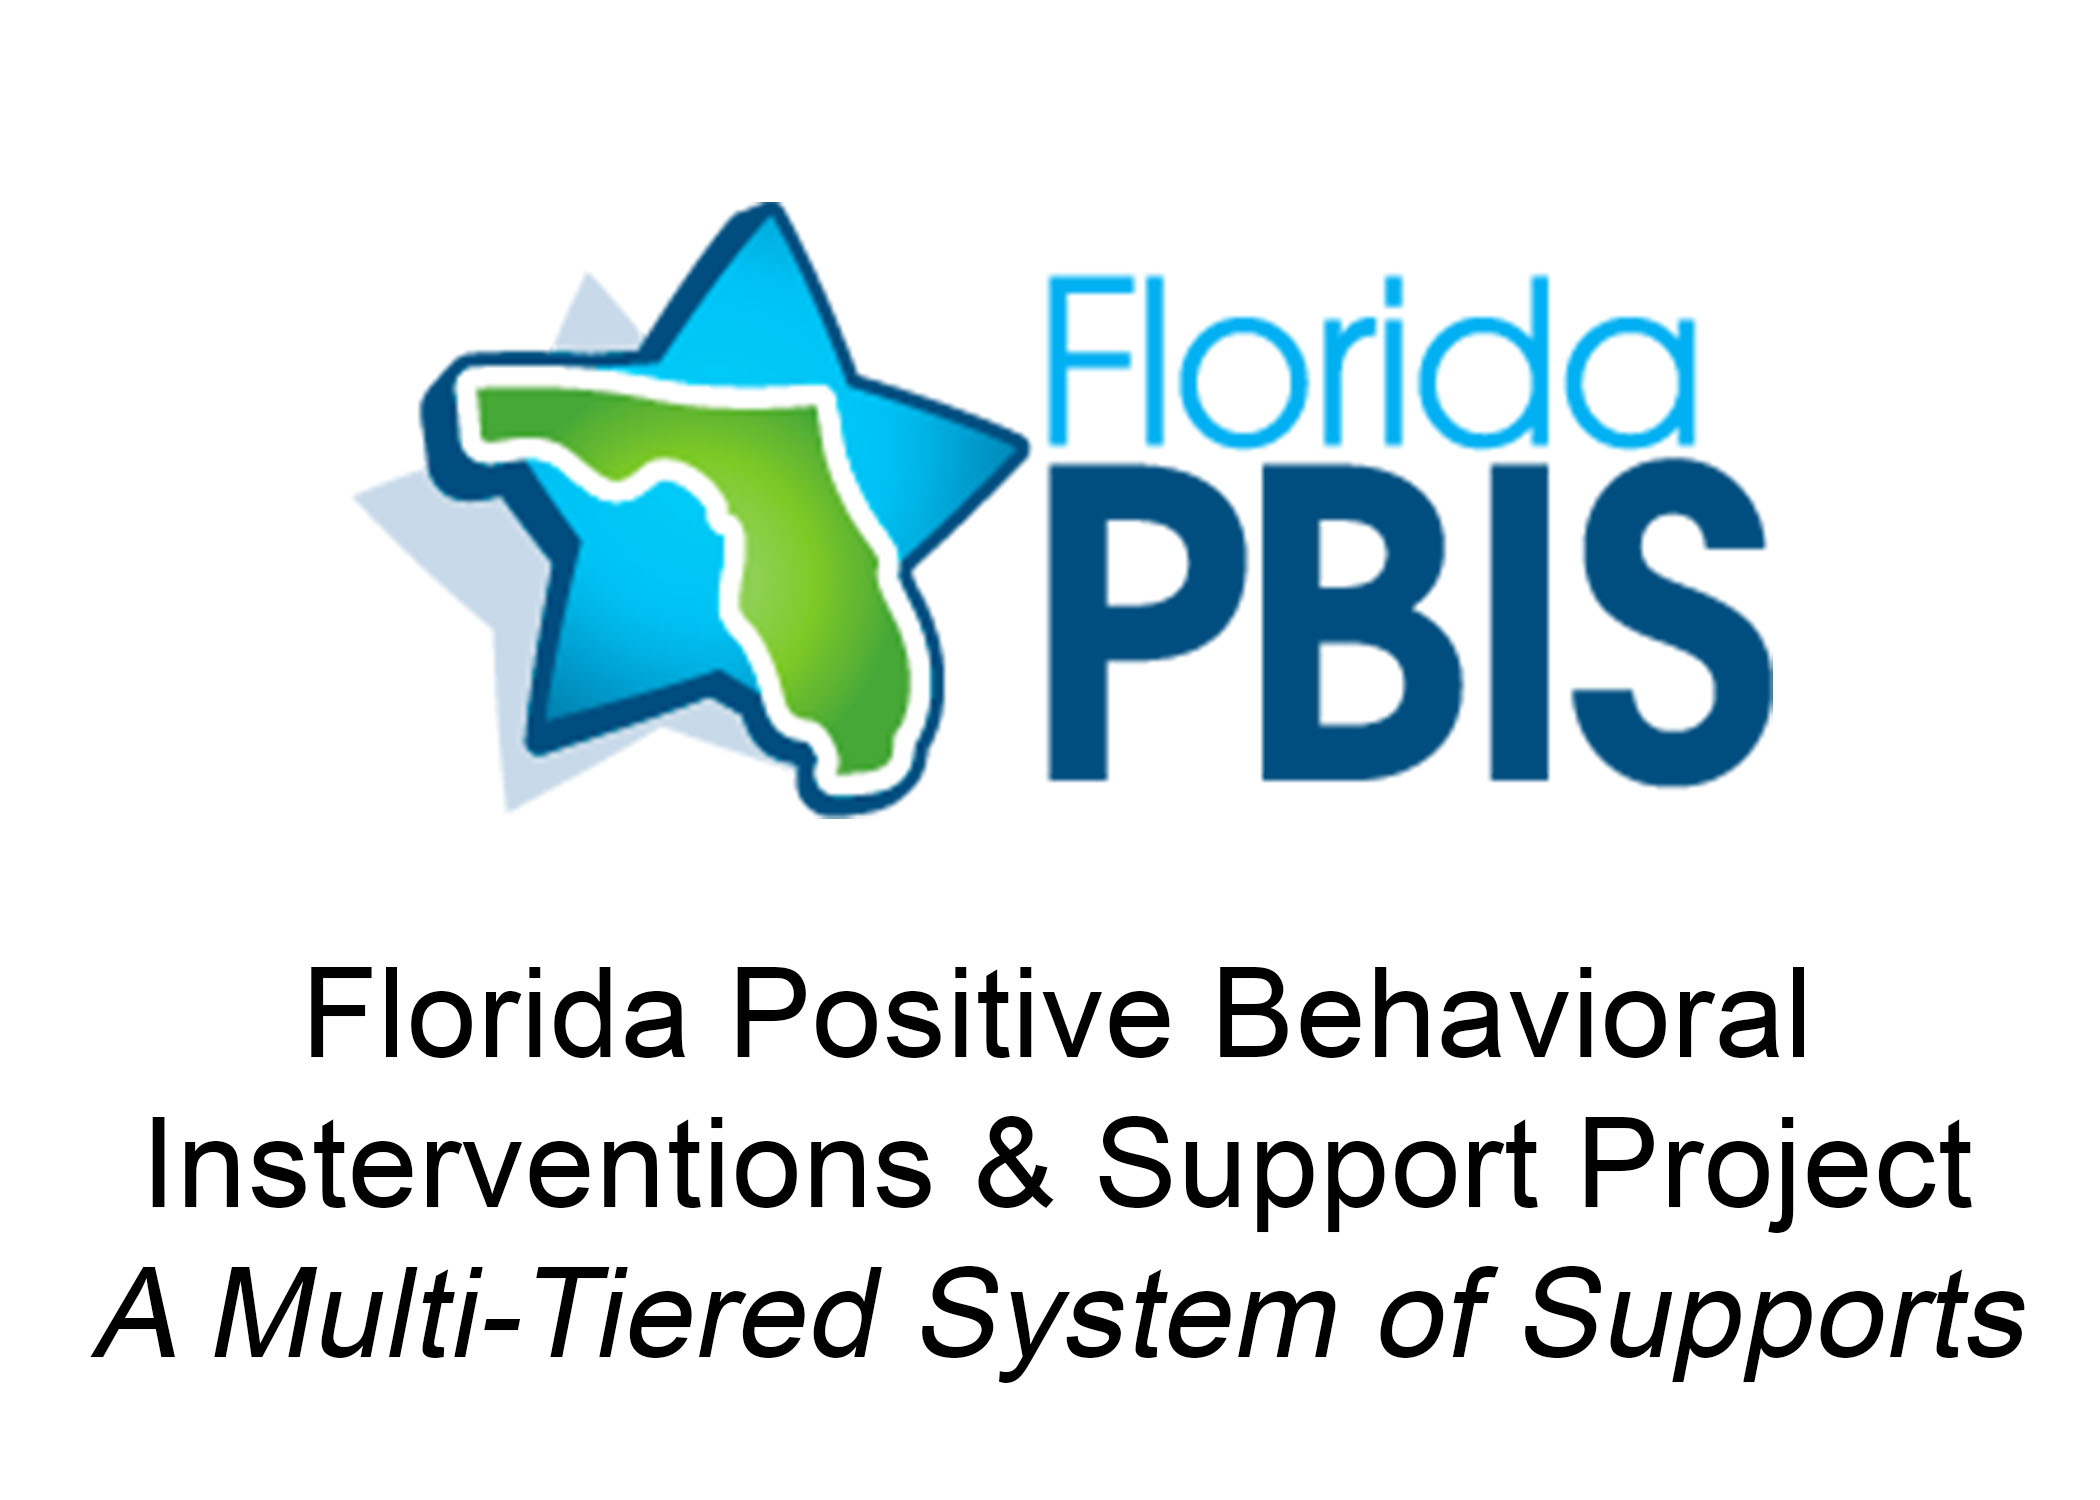 Florida Positive Behavioral Interventions & Support Project, A Multi-Tiered System of Supports